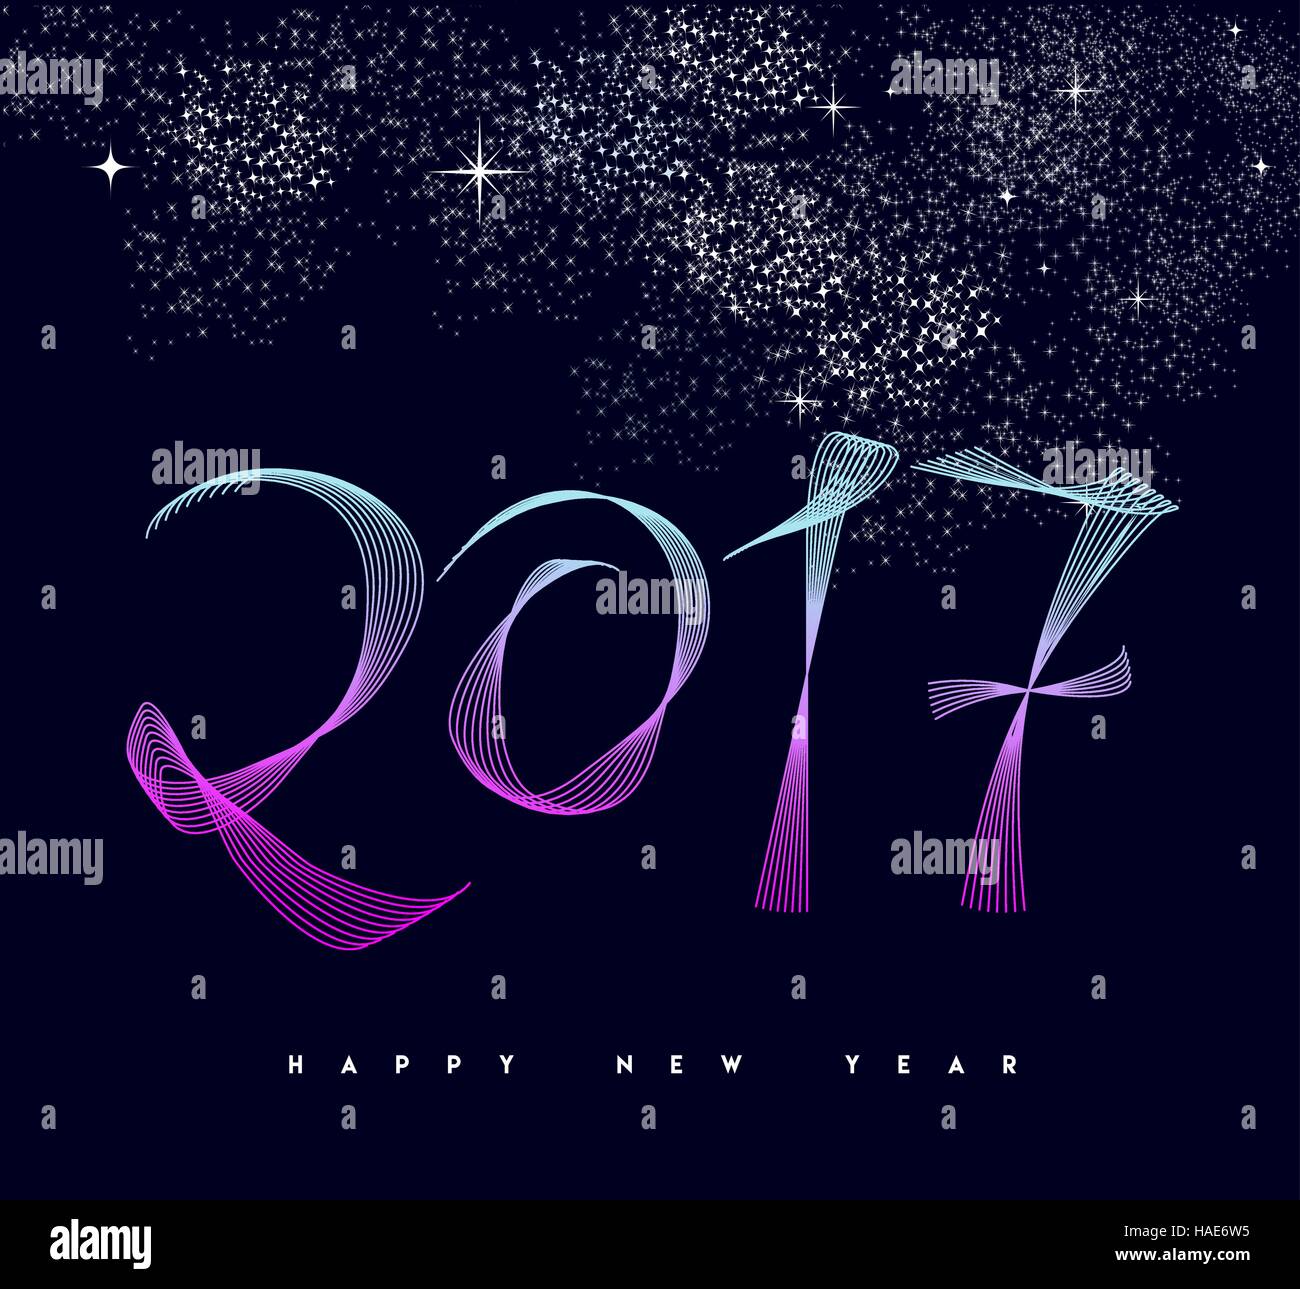 Happy New Year 2017, modern number design over firework night sky background. EPS10 vector. Stock Vector